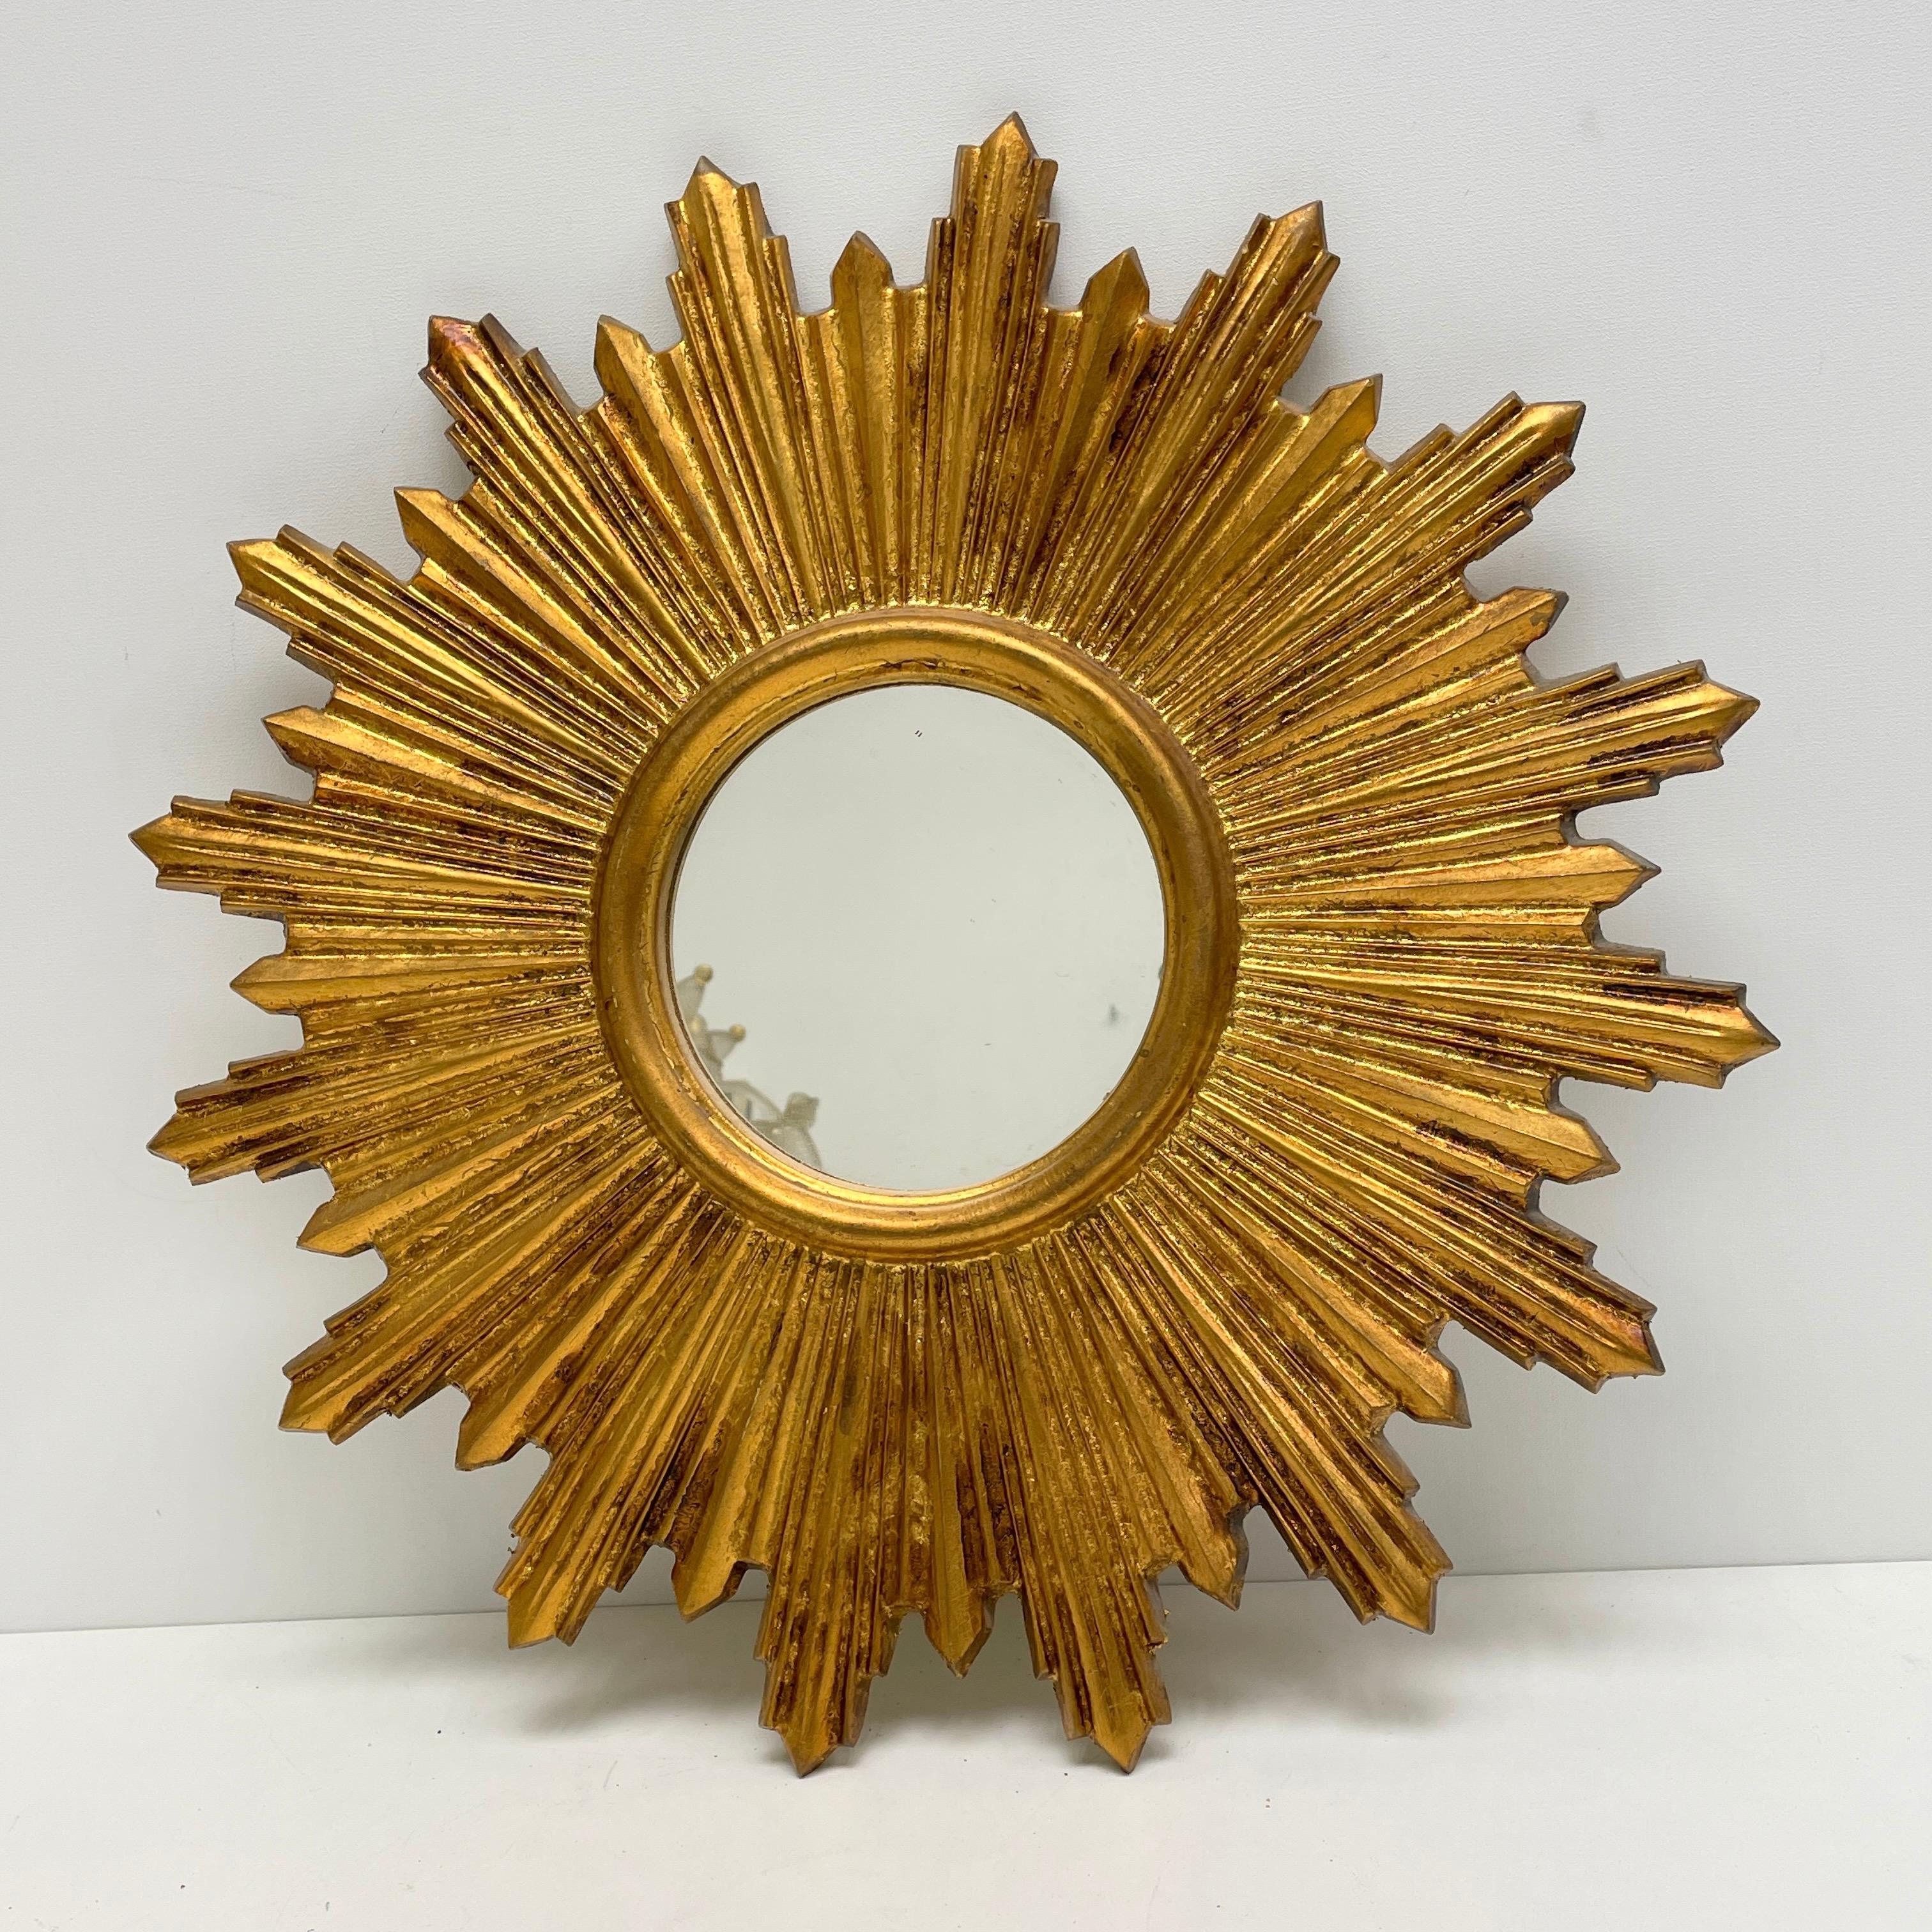 A gorgeous starburst sunburst mirror. Made of gilded wood. It measures approximate: 16 7/8